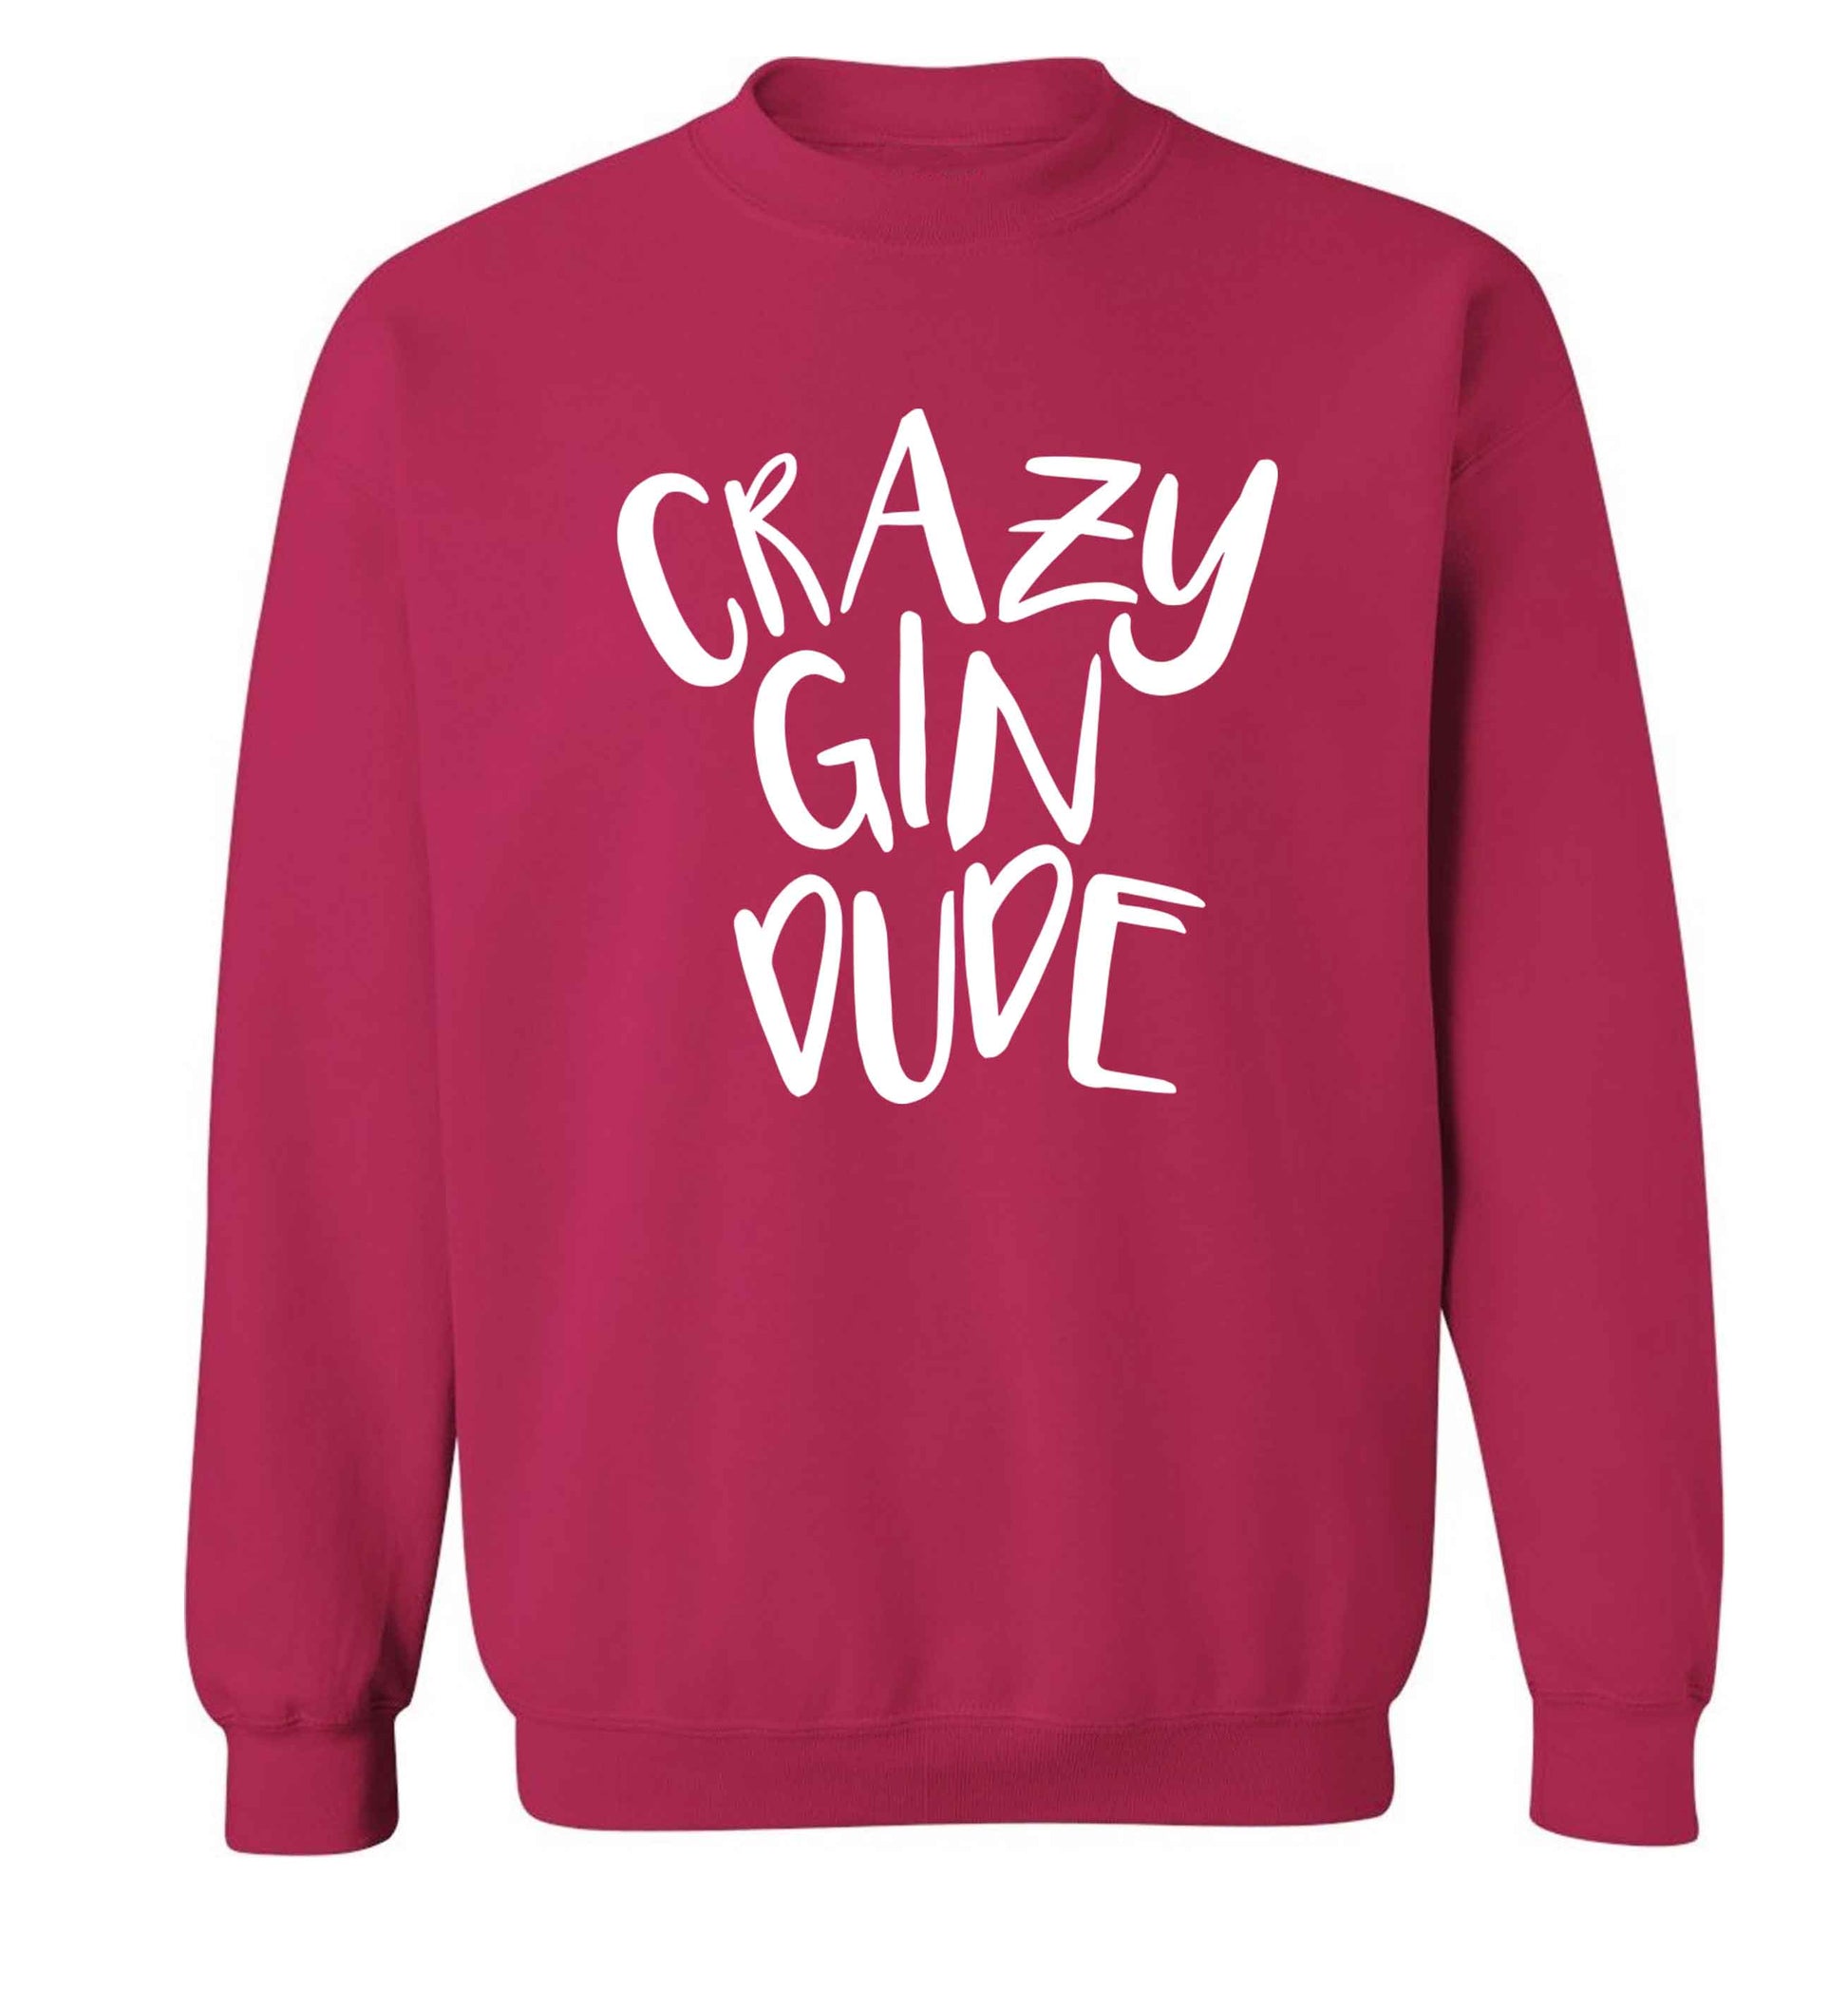 Crazy gin dude Adult's unisex pink Sweater 2XL